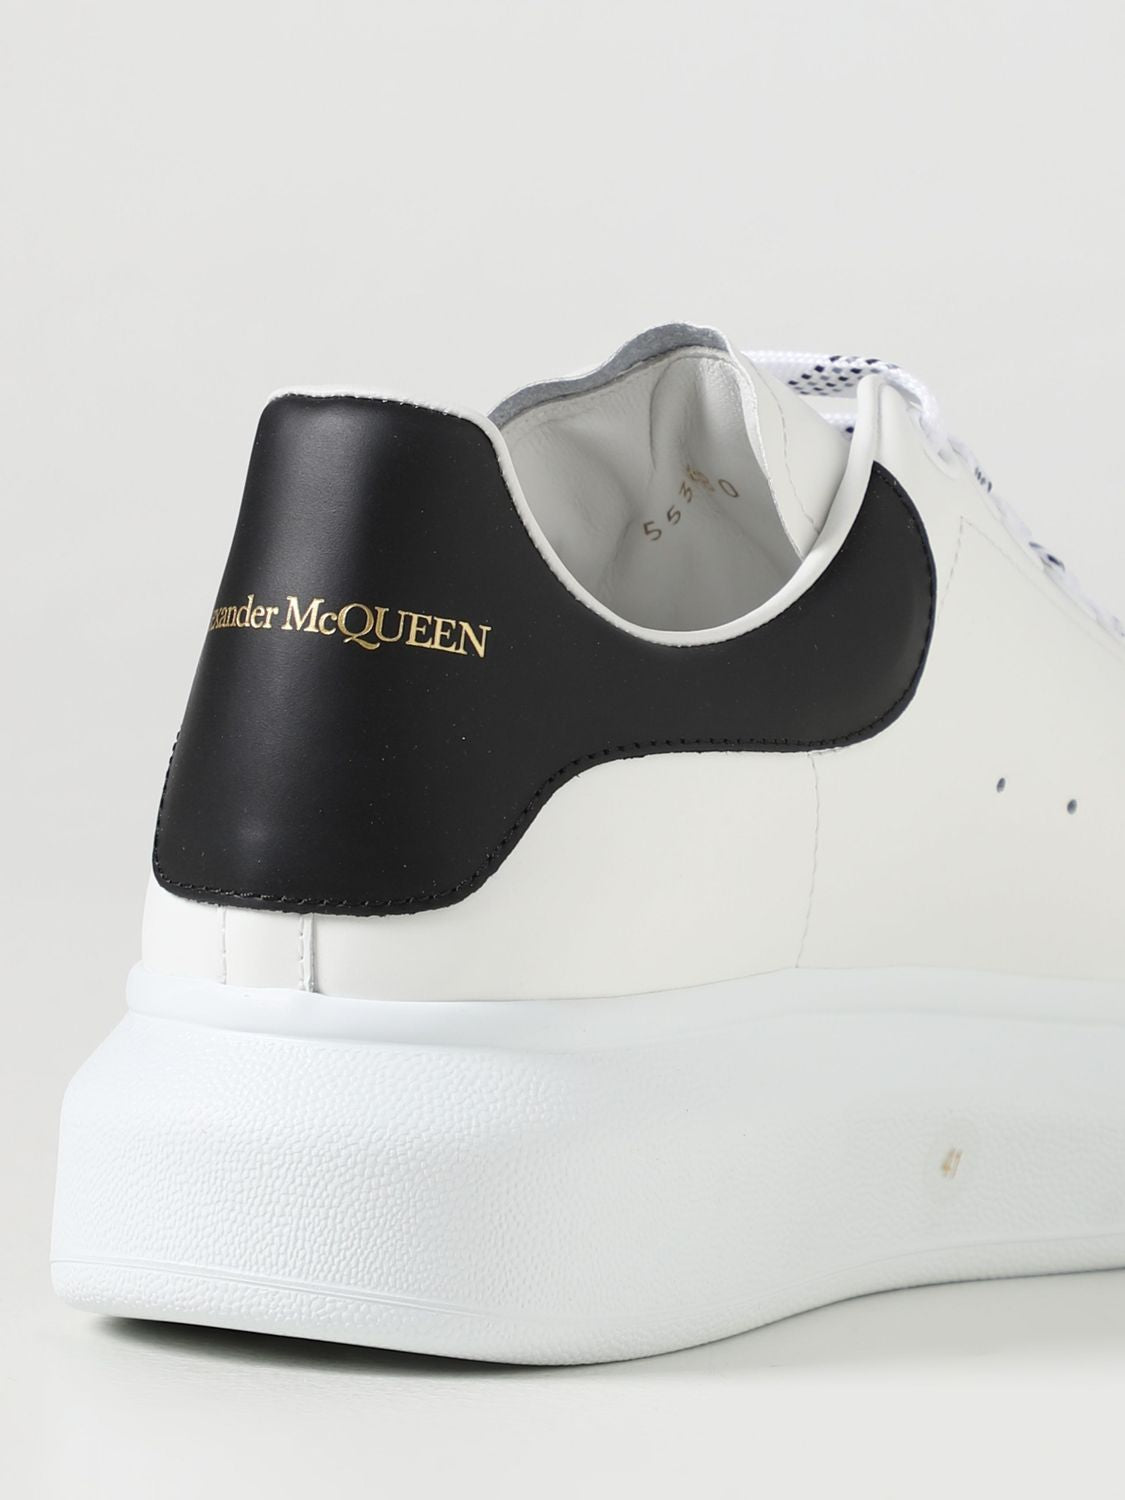 Men's White Leather Oversized Sneakers with Black Accents